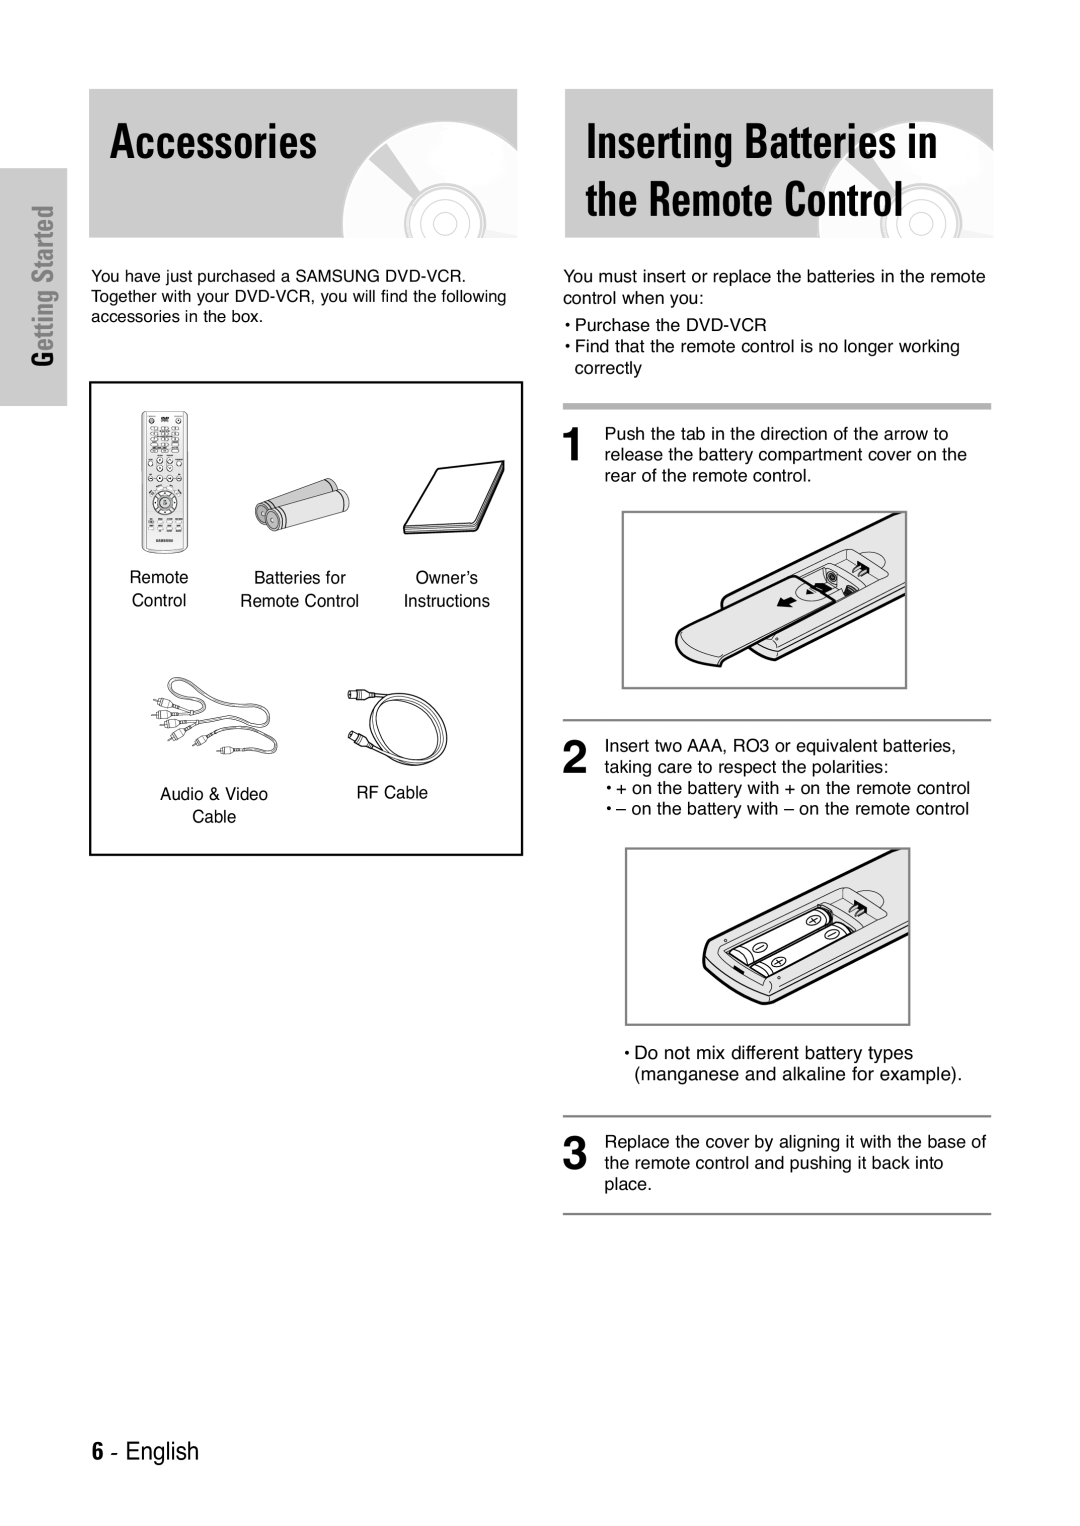 Samsung V7000K, V6500K user manual Accessories, Inserting Batteries in the Remote Control, English, Getting Started 